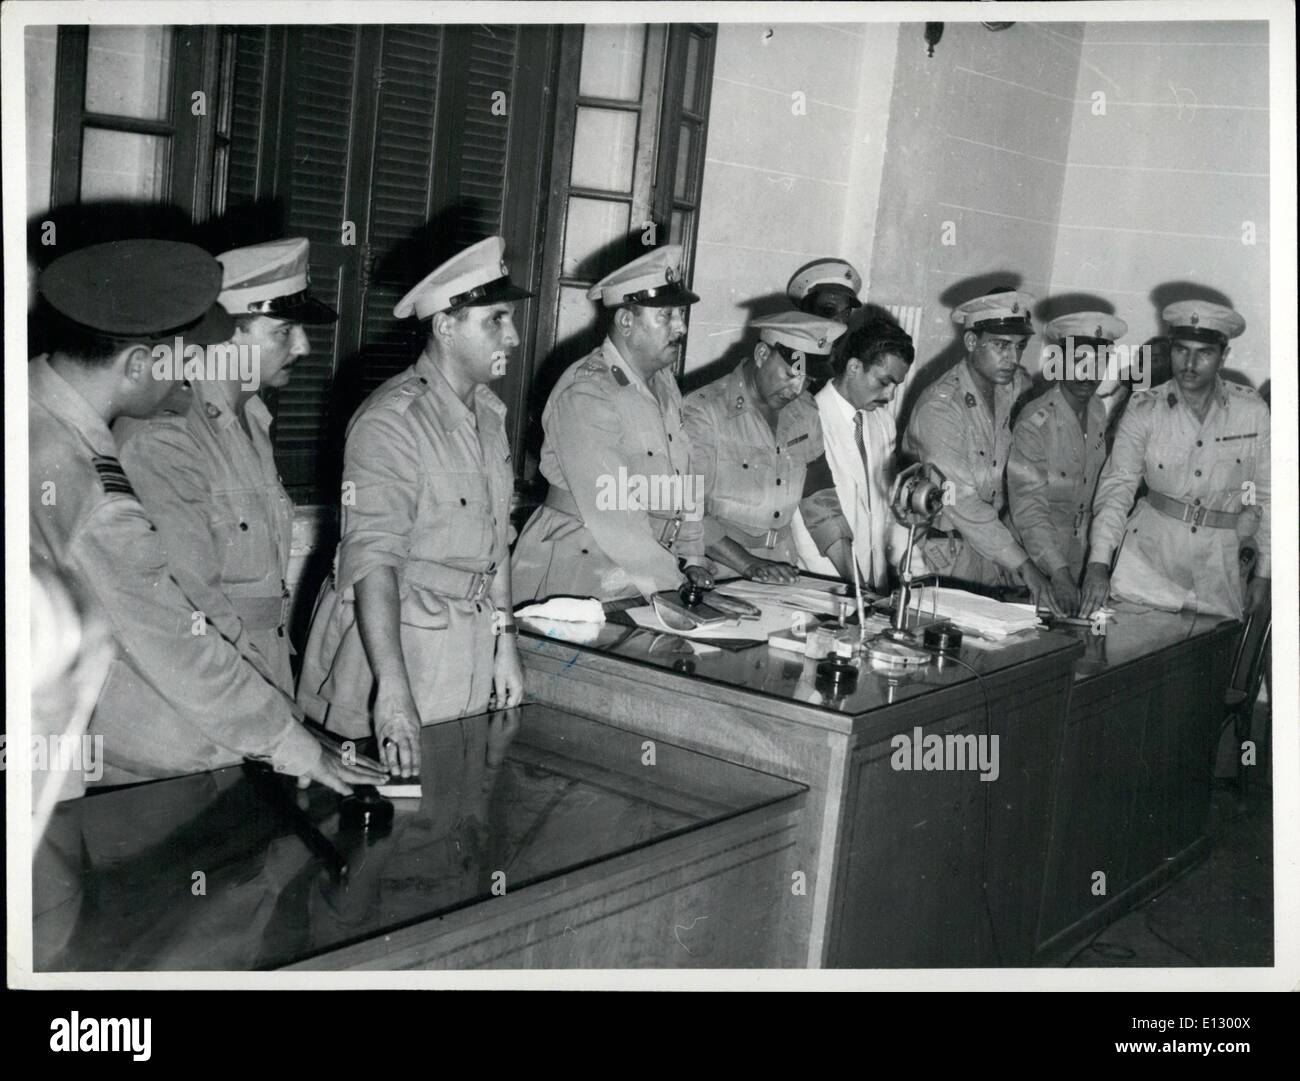 Feb. 25, 2012 - A special court to try Adel Lamloum at Minia Upper Egypt Members of the new Military Court giving the oath before assuming their duties. The court is under the Presidency of Co. Salah El Dine Hitata who commands the 2nd Battalion Stock Photo